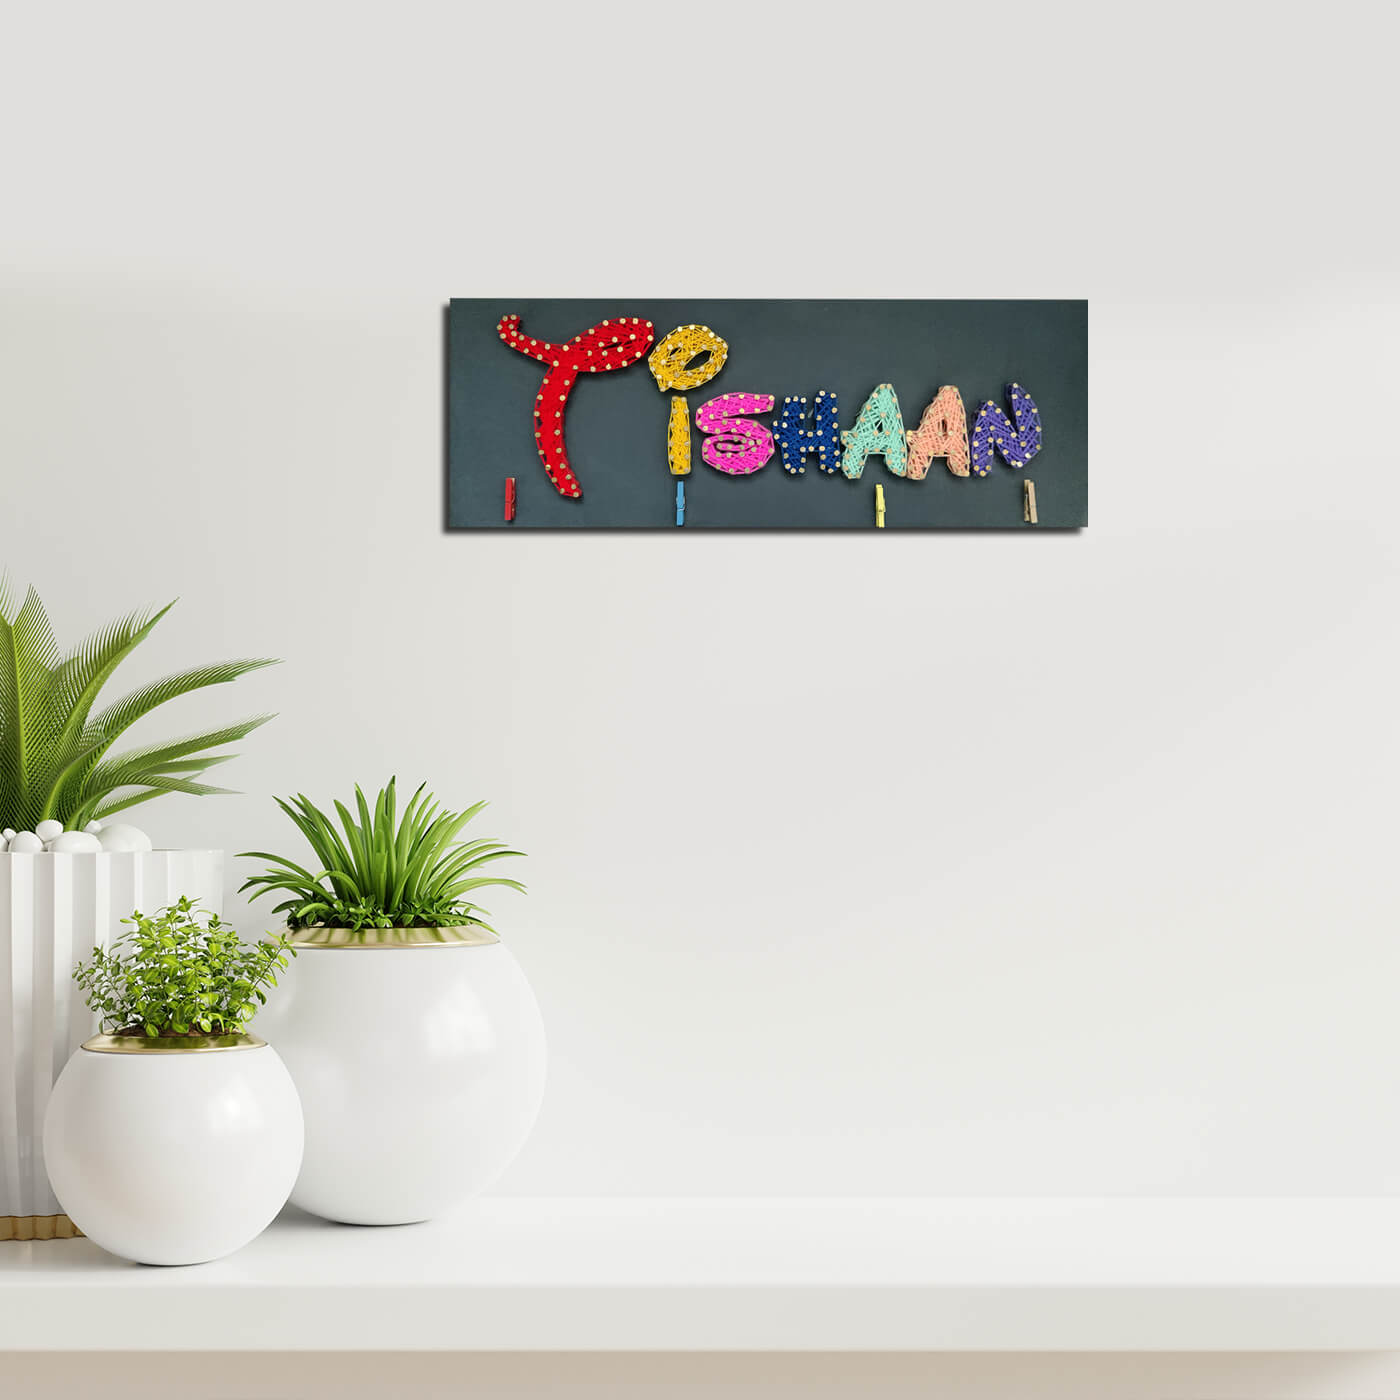 Multi-coloured Personalised String Art Name Plate